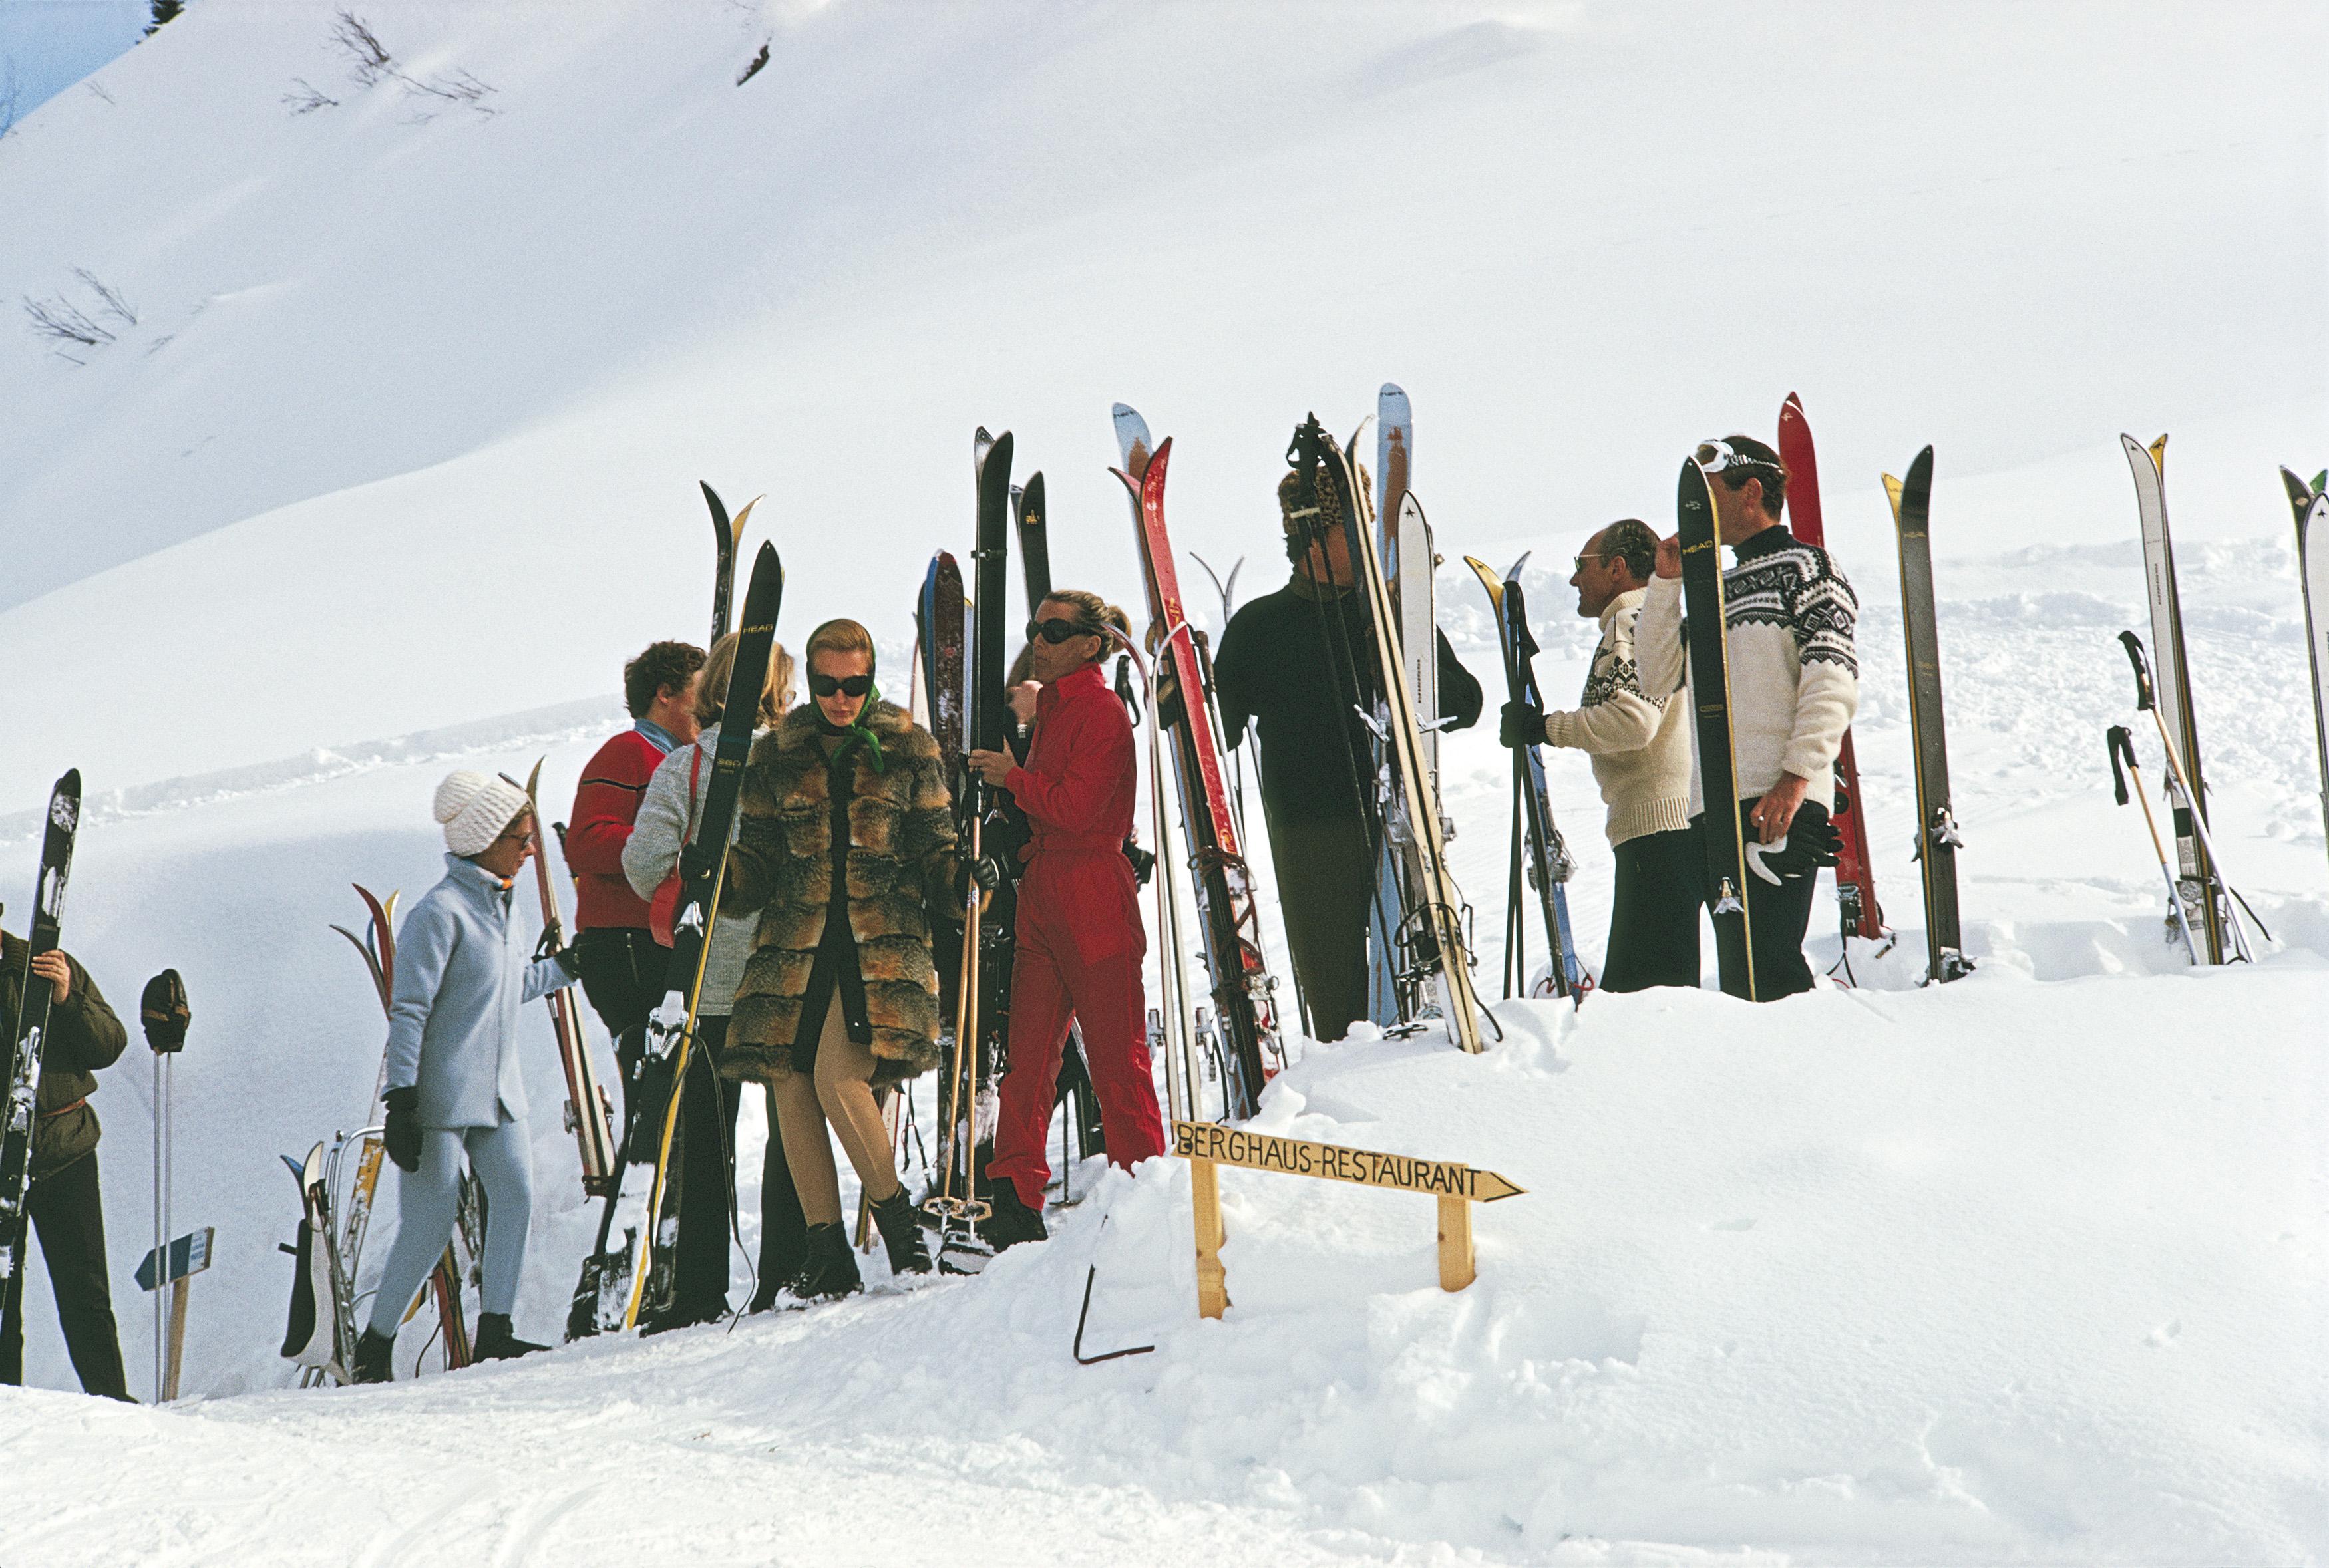 Slim Aarons
Skiers At Gstaad
1969 (printed later)
C print 
Estate stamped and numbered edition of 150 
with Certificate of authenticity

Skiers at Gstaad, Switzerland, March 1969. (Photo by Slim Aarons/Hulton Archive/Getty Images)

Slim Aarons, an